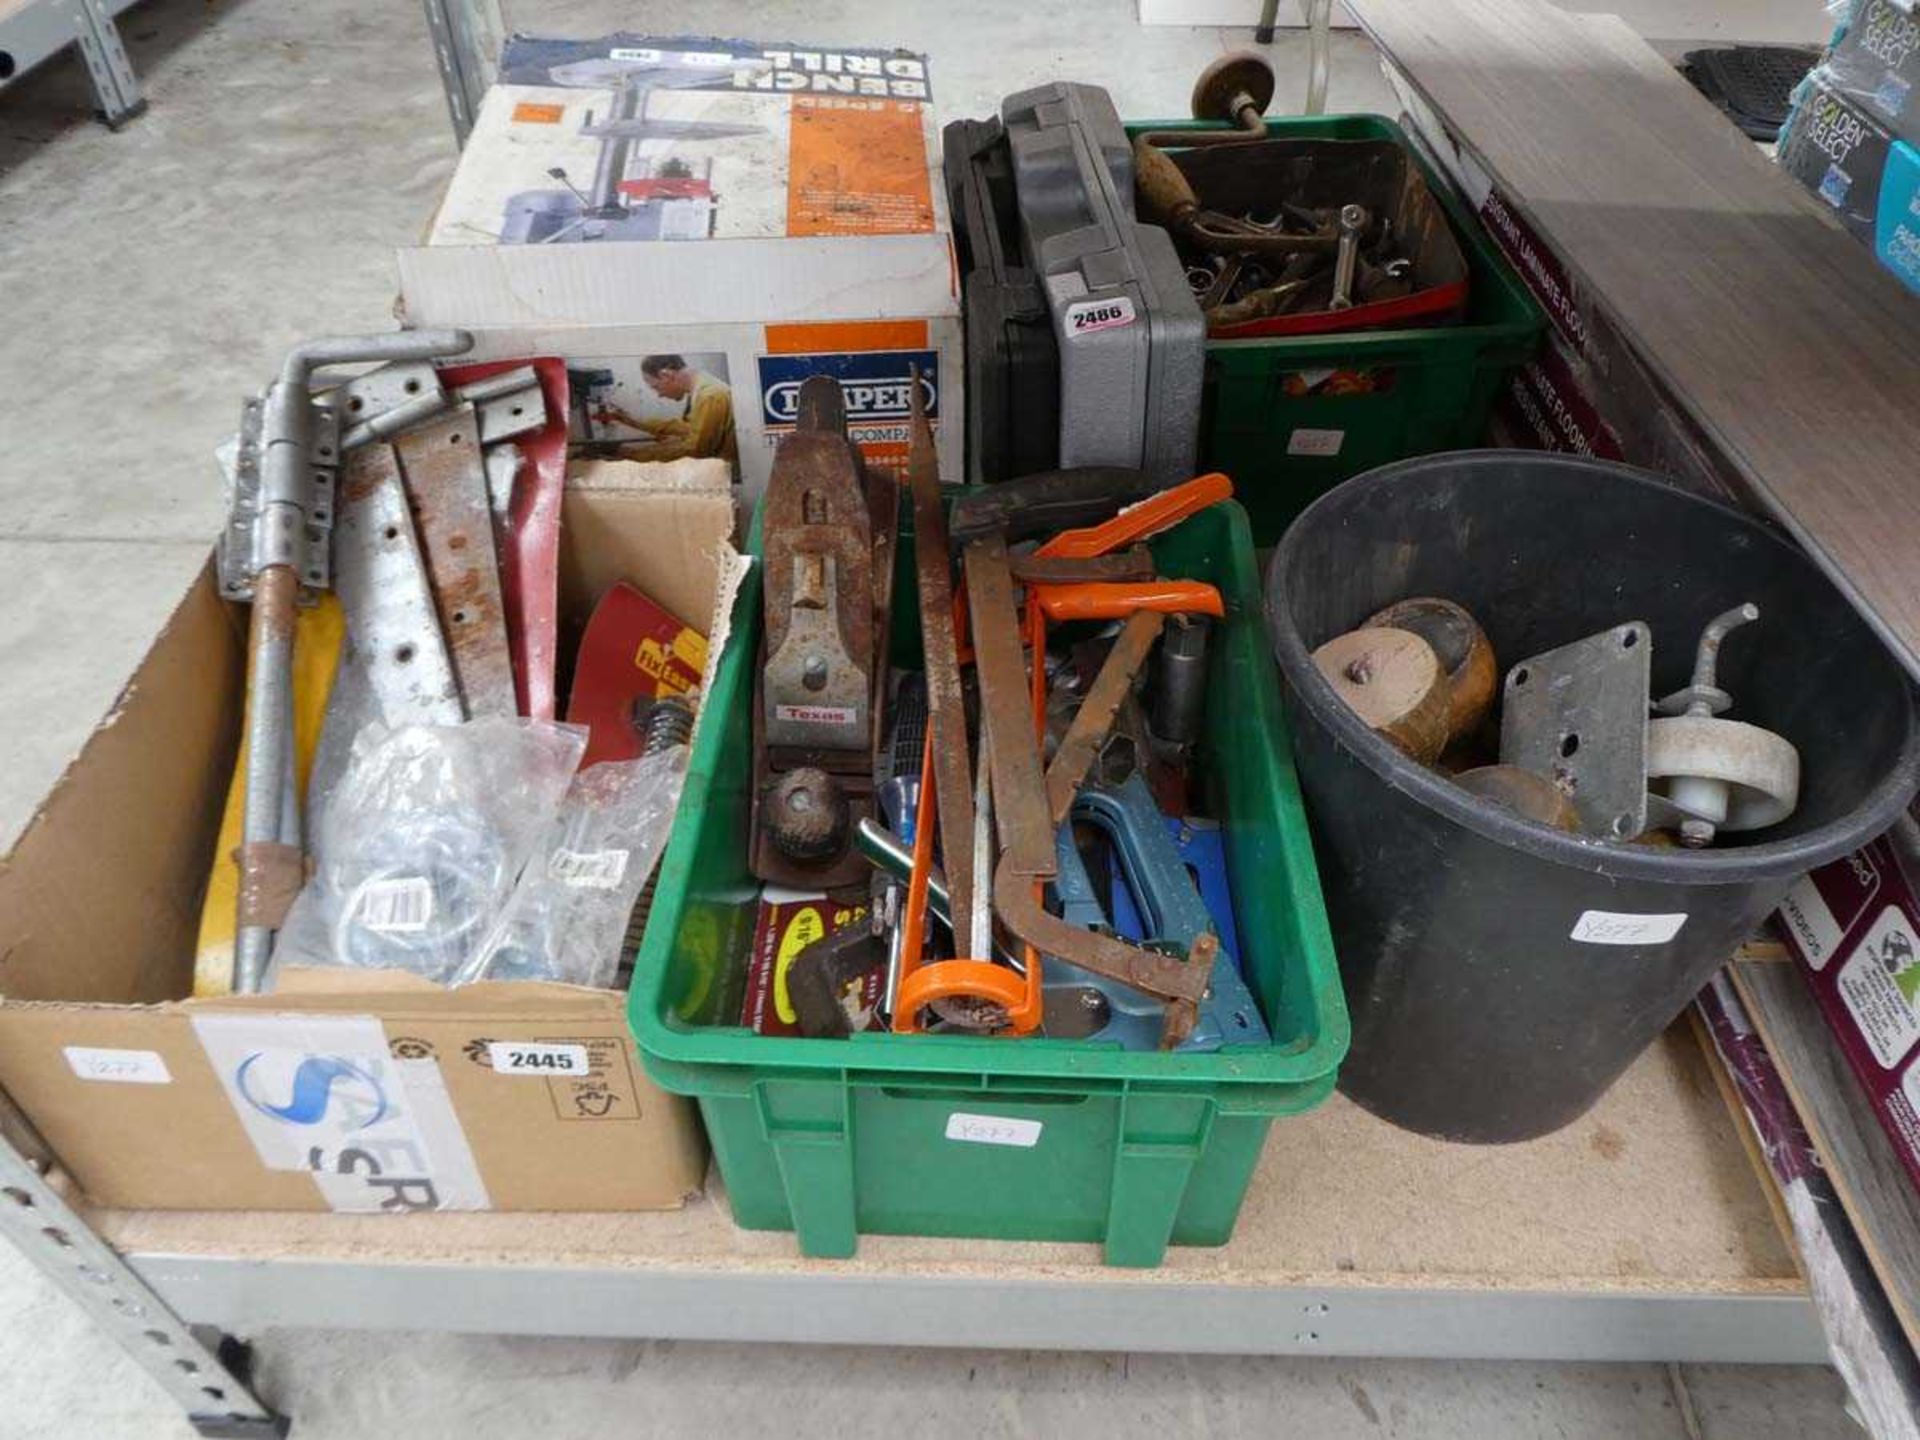 3 boxes, bucket and 2 toolboxes incl. planes, staples, castor wheels, door furniture, etc.